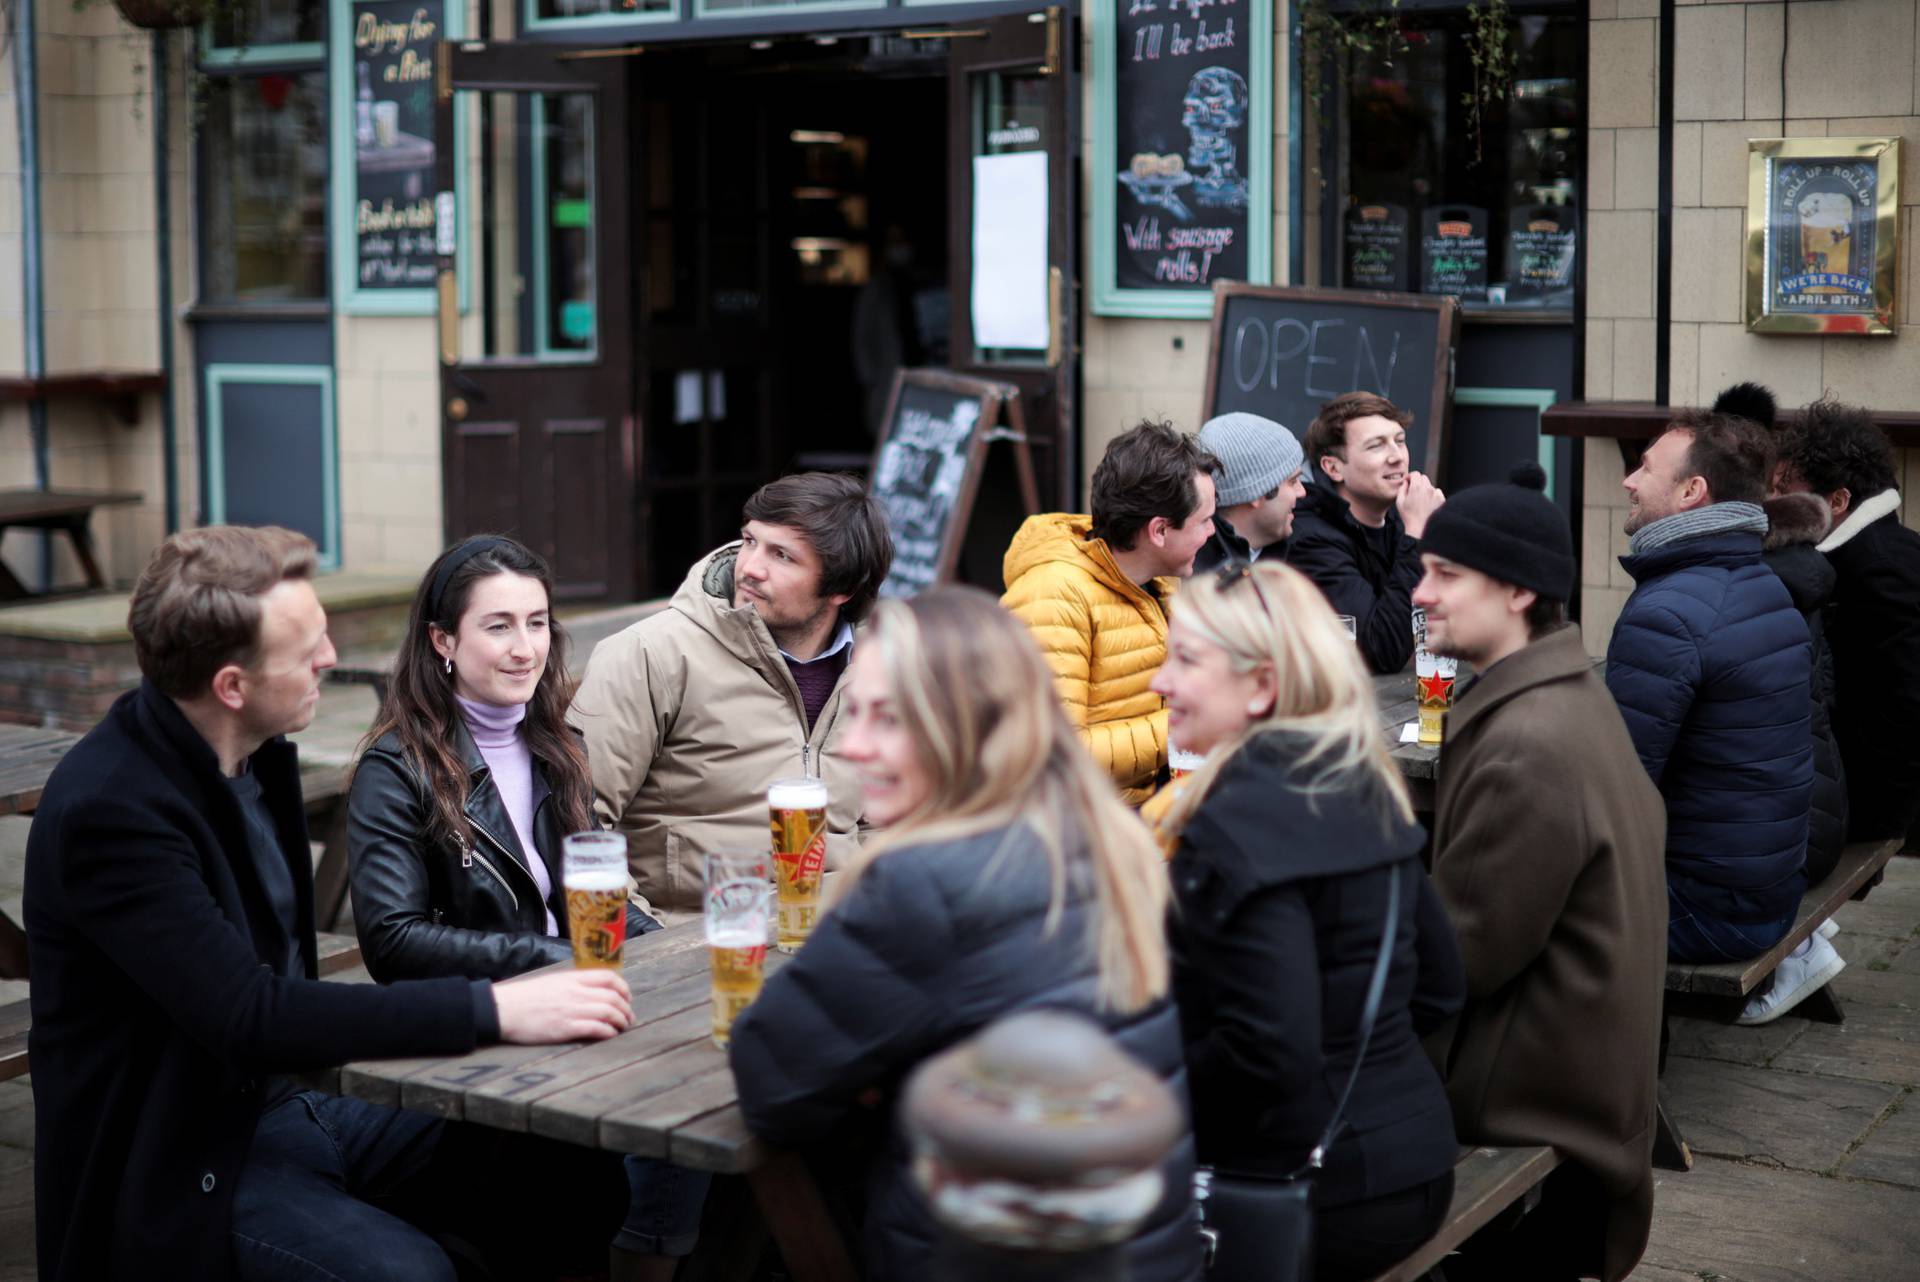 Pubs reopen as COVID-19 restrictions ease, in London